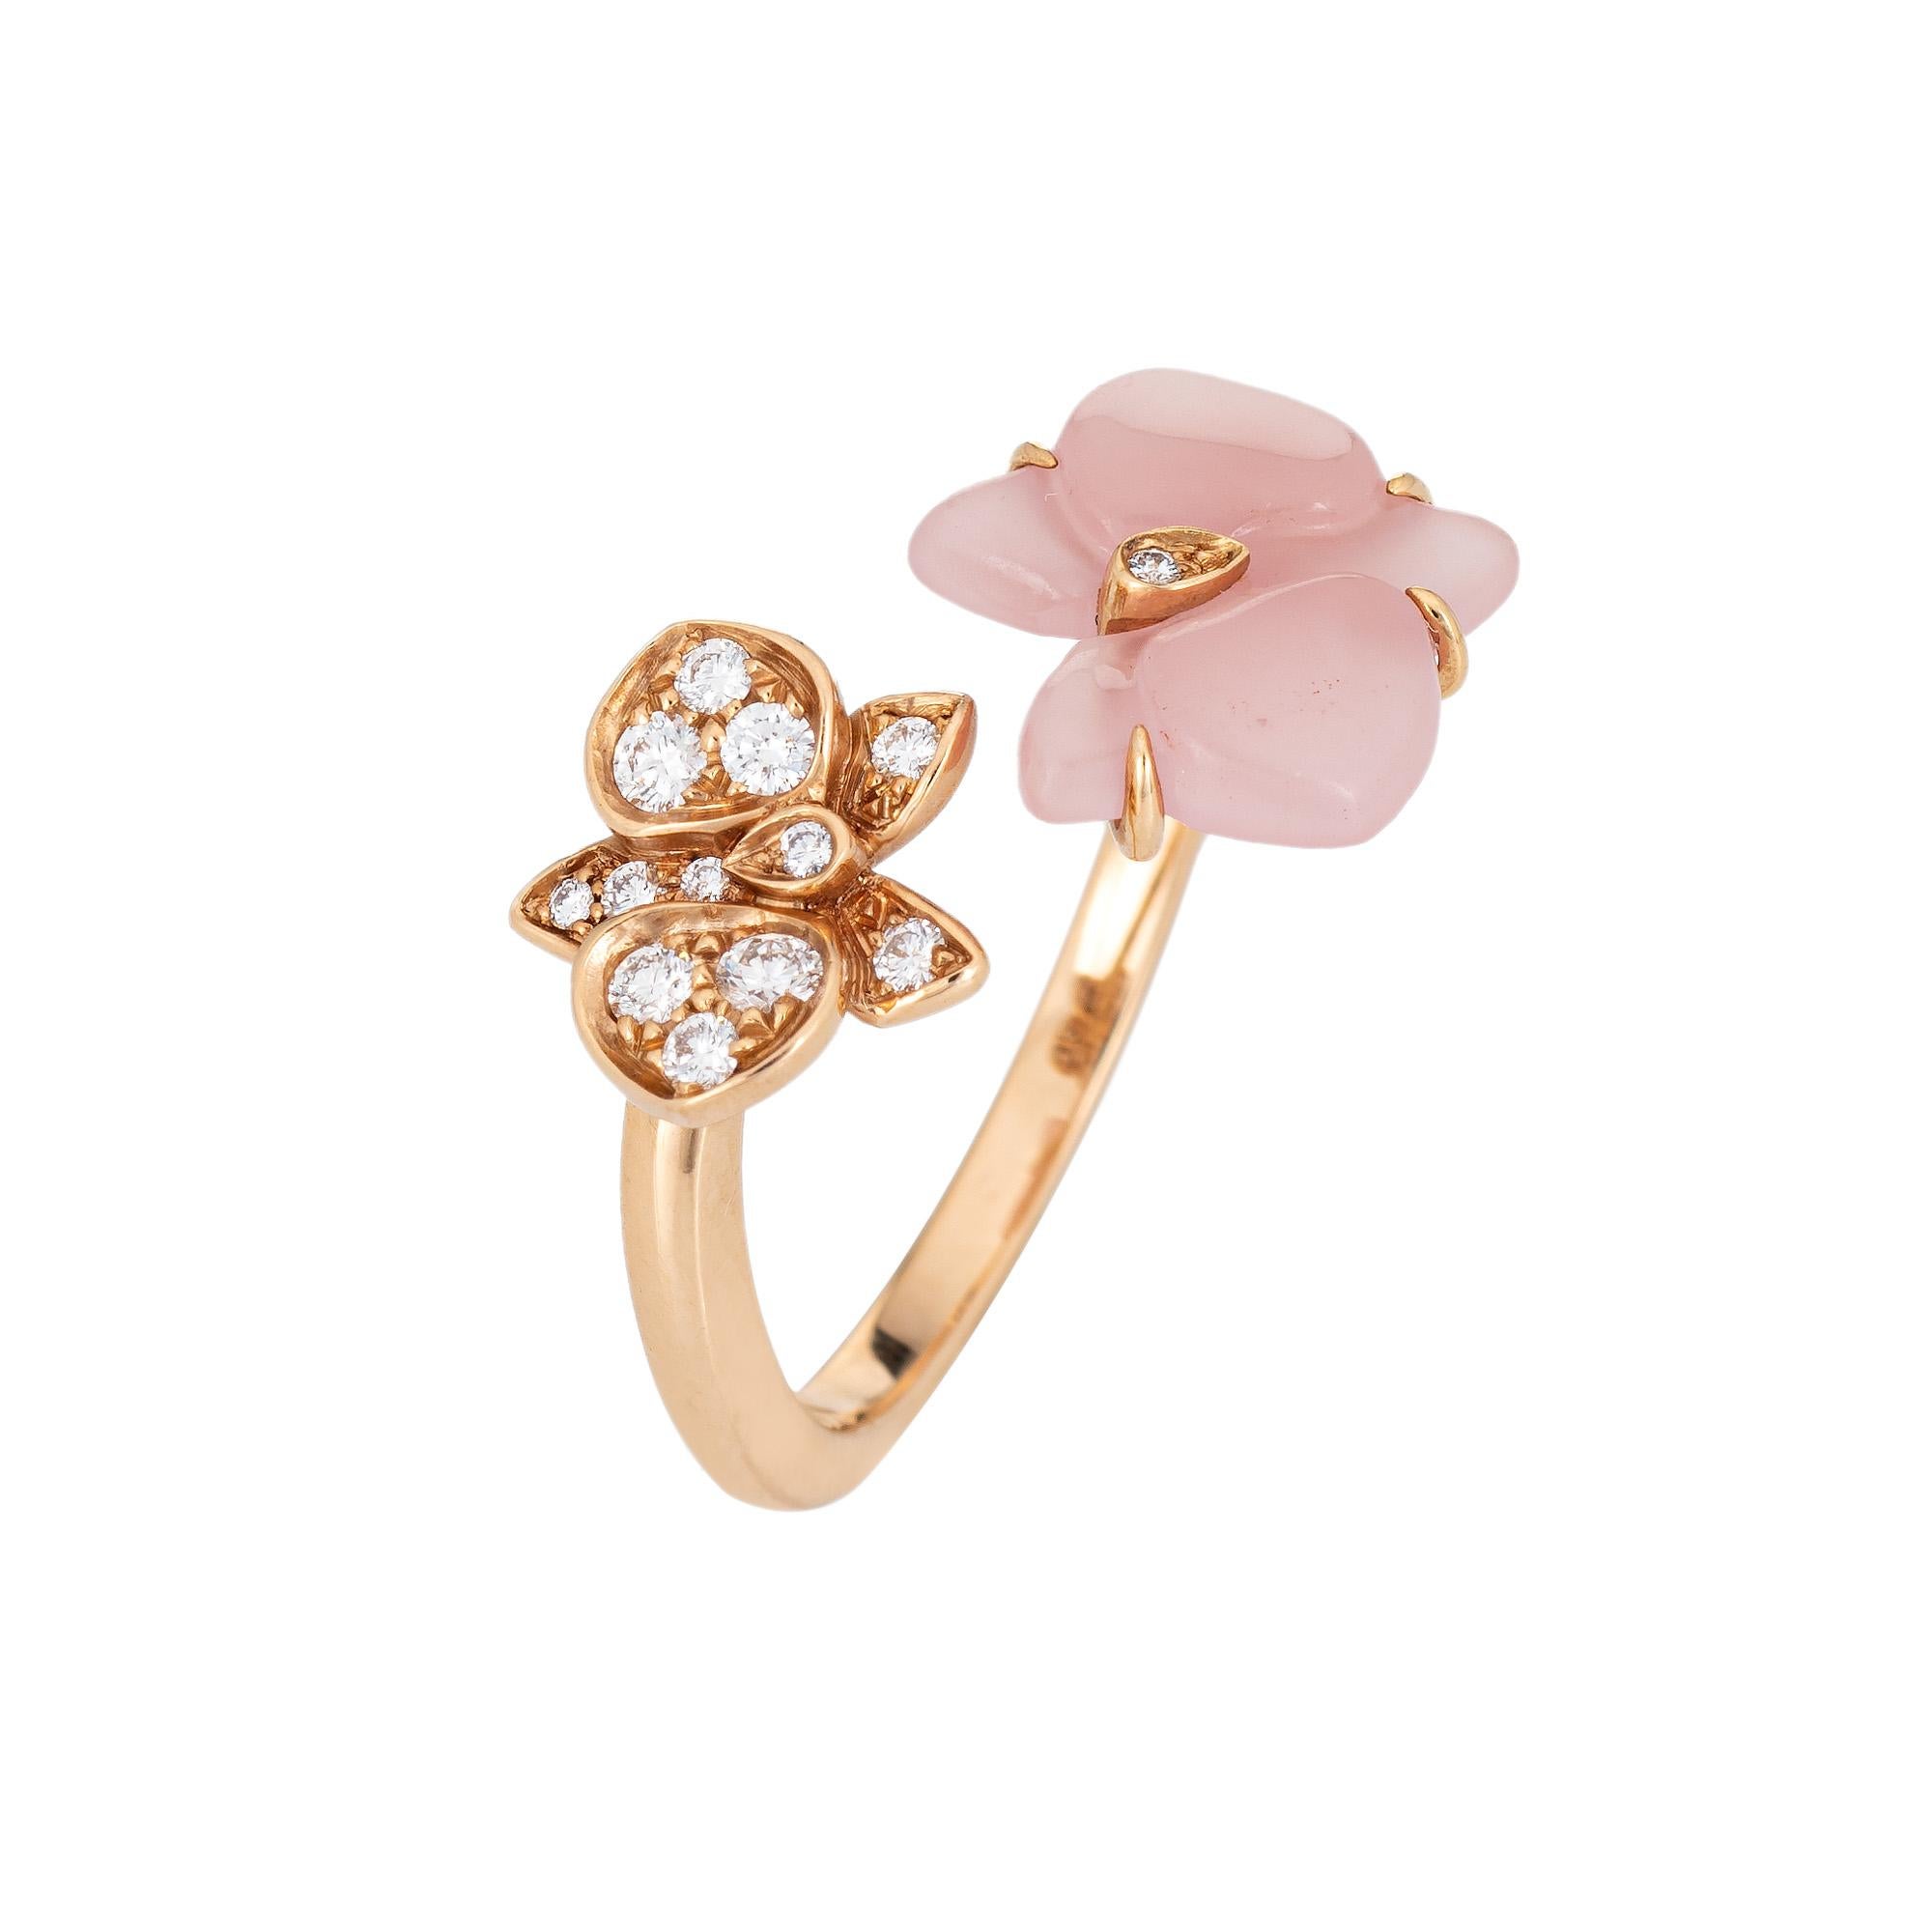 Estate Cartier 'Caresse D'Orchidees' ring crafted in 18 karat rose gold.  

13 round brilliant cut diamonds total an estimated 0.12 carats (estimated at F-G color and VVS2 clarity). Pink chalcedony measures 11mm wide (in very good condition and free